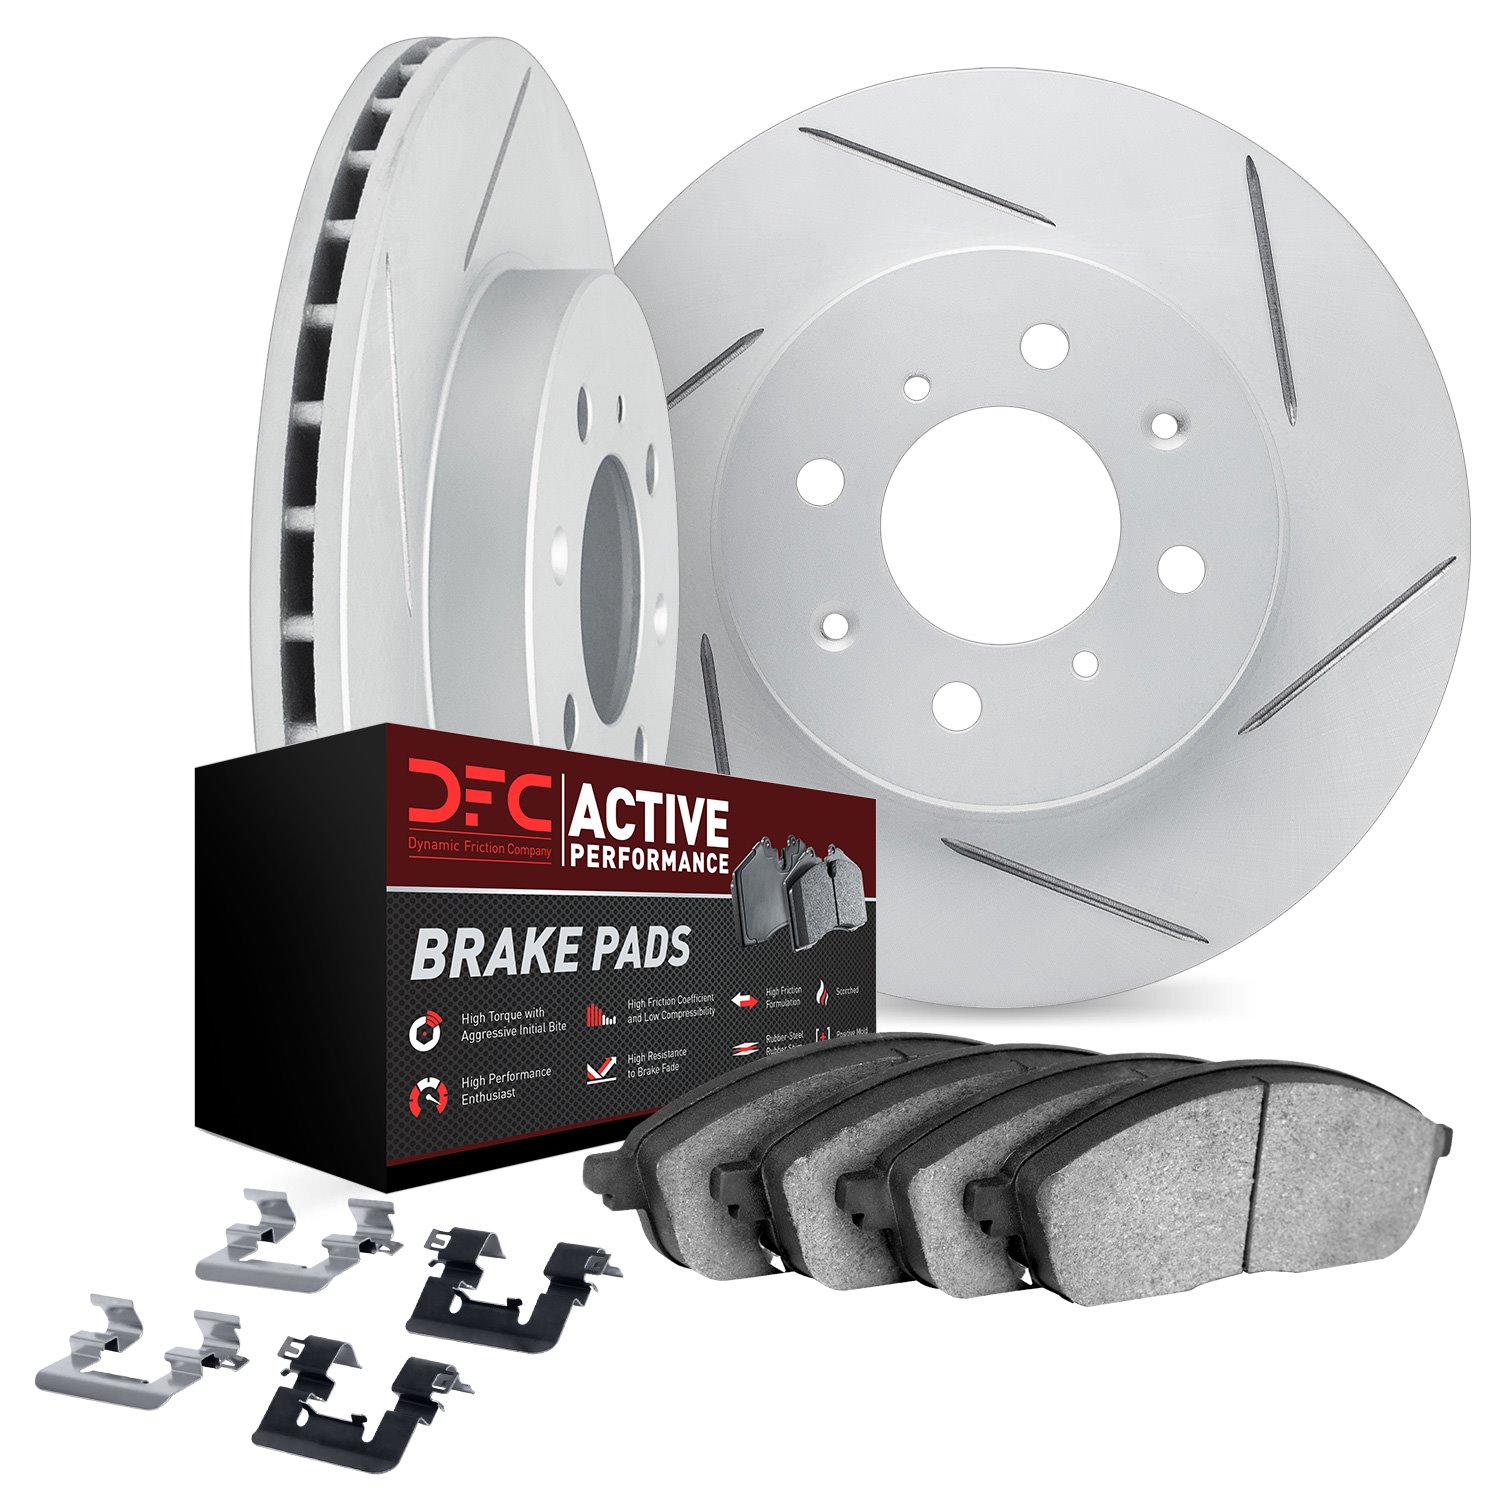 2712-67054 Geoperformance Slotted Brake Rotors with Active Performance Pads Kits & Hardware, 2007-2014 Infiniti/Nissan, Position